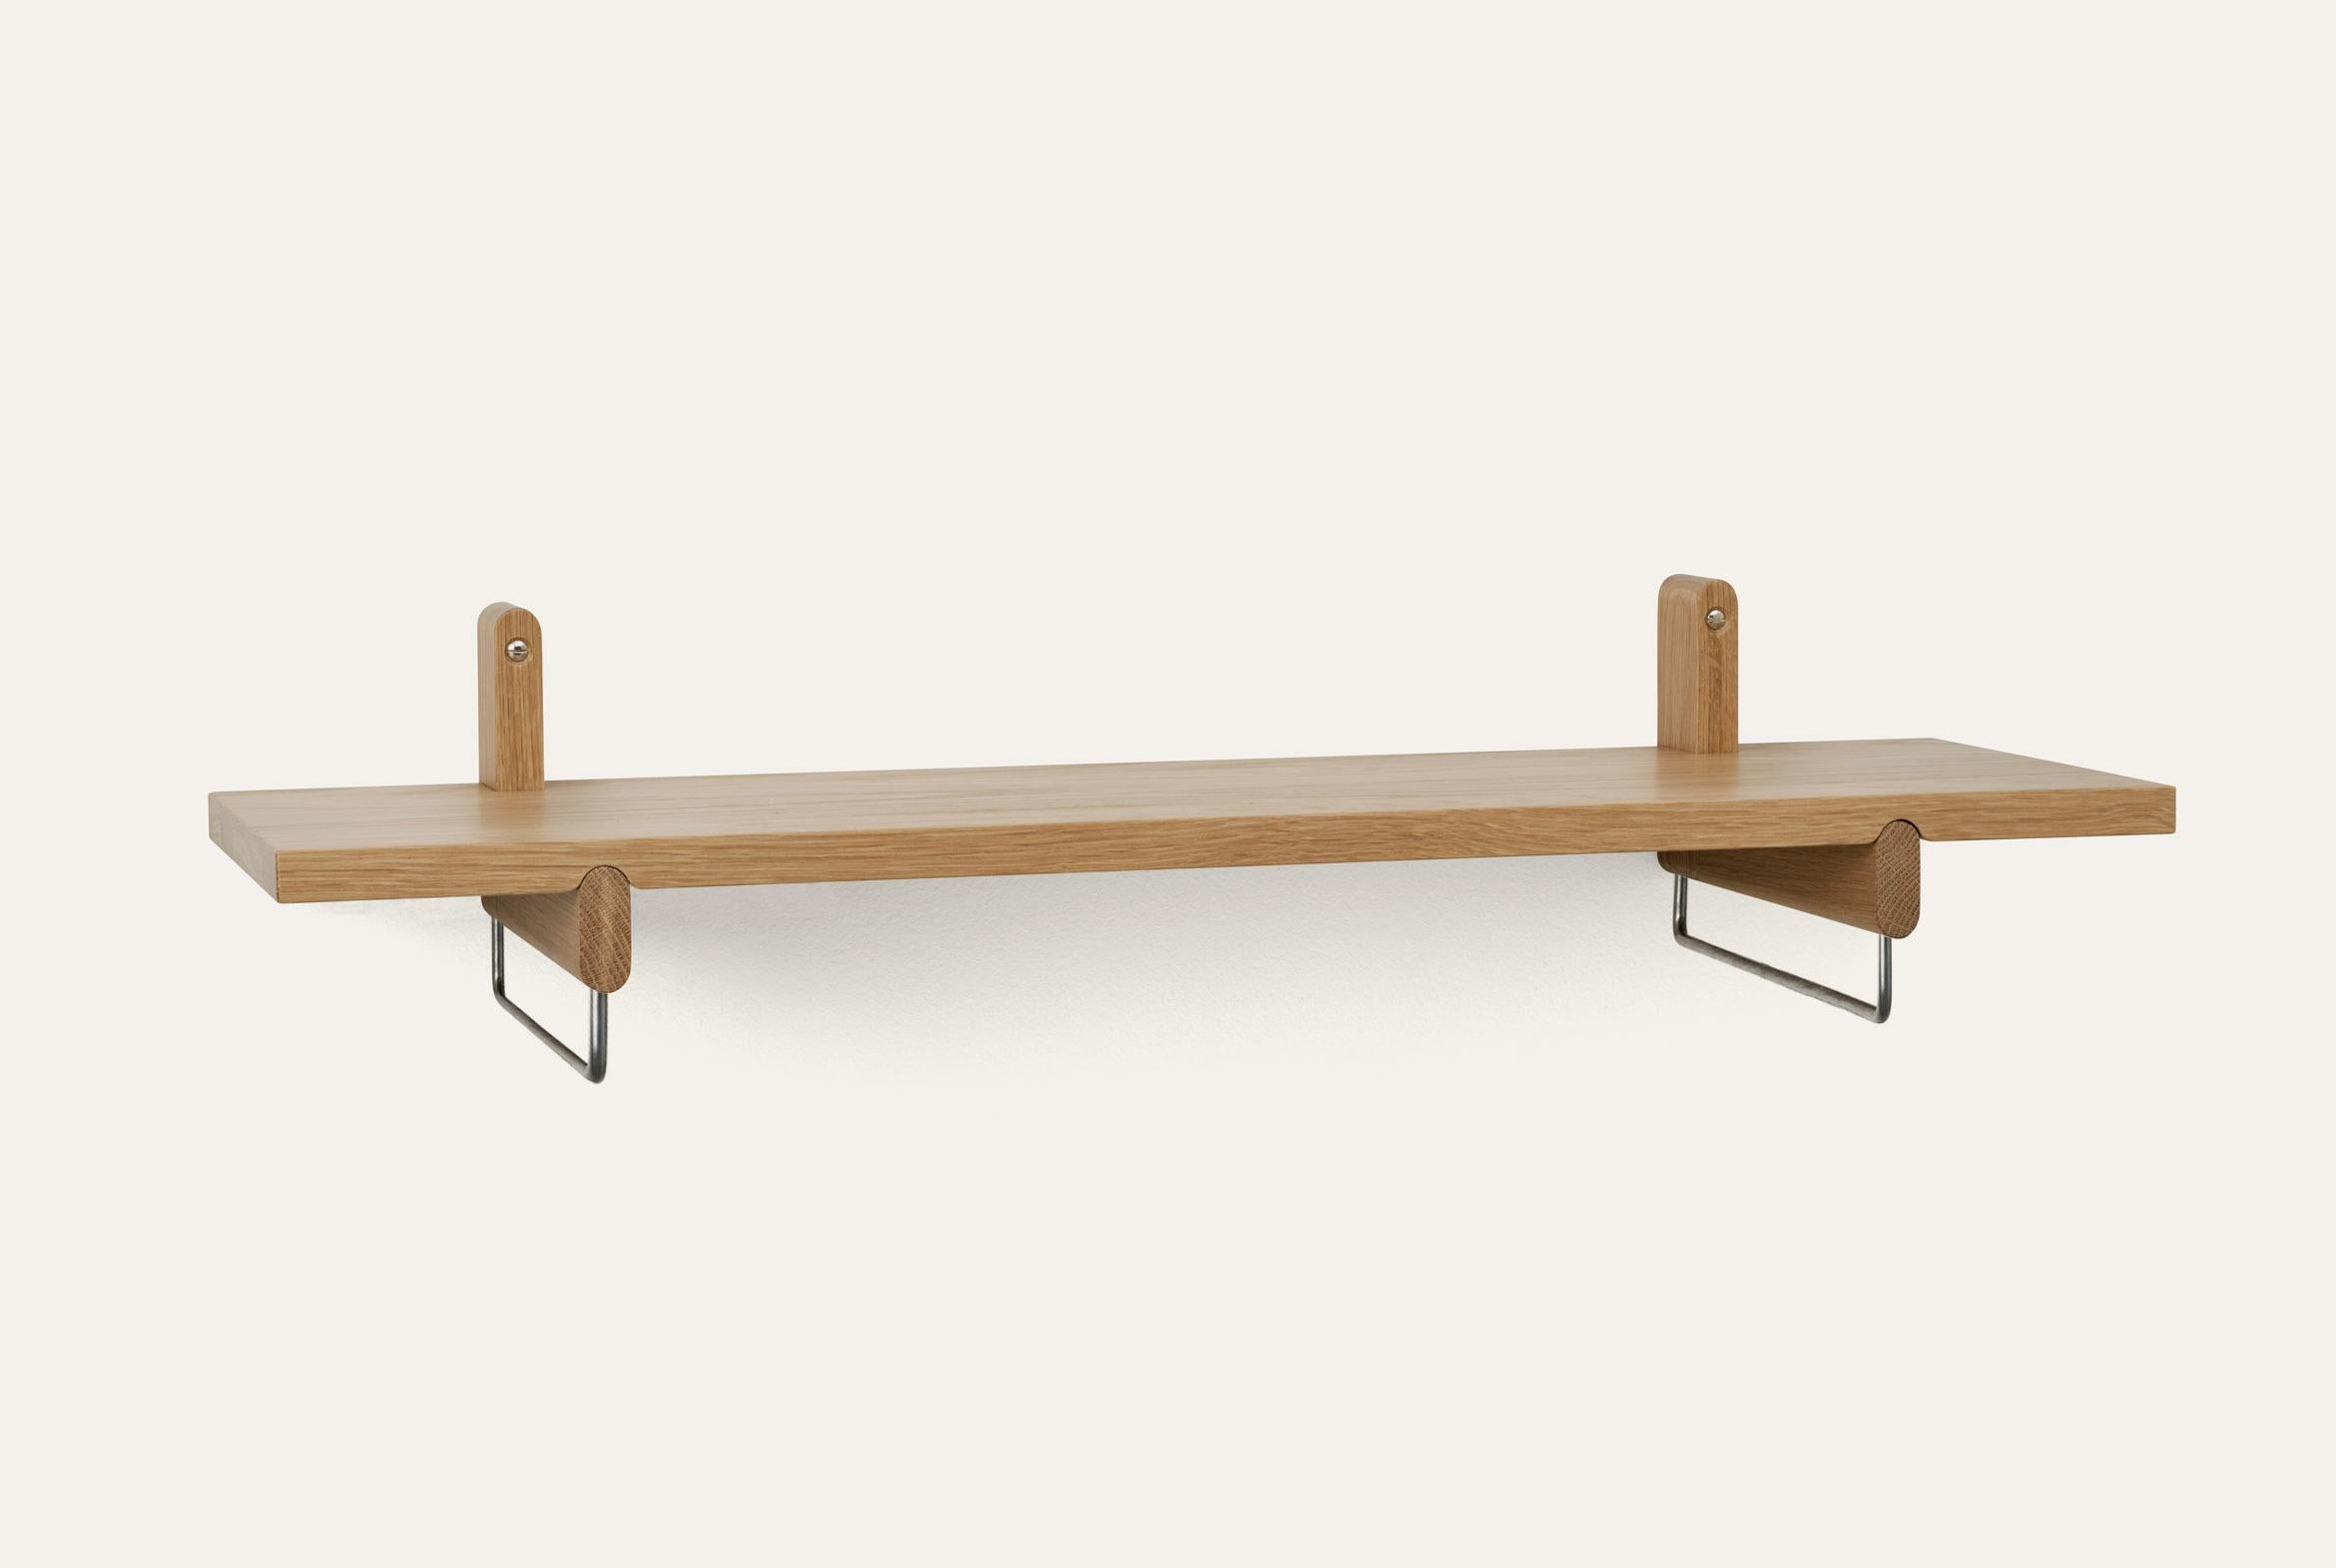 Natural rondelle shelf with hanger by Storängen Design
Dimensions: D 80 x W 25 x H 18 cm
Materials: oak wood, steel.
Available in other colors and with or without steel hanger.

Rondelle can be a shelf or a small table depending on your needs.